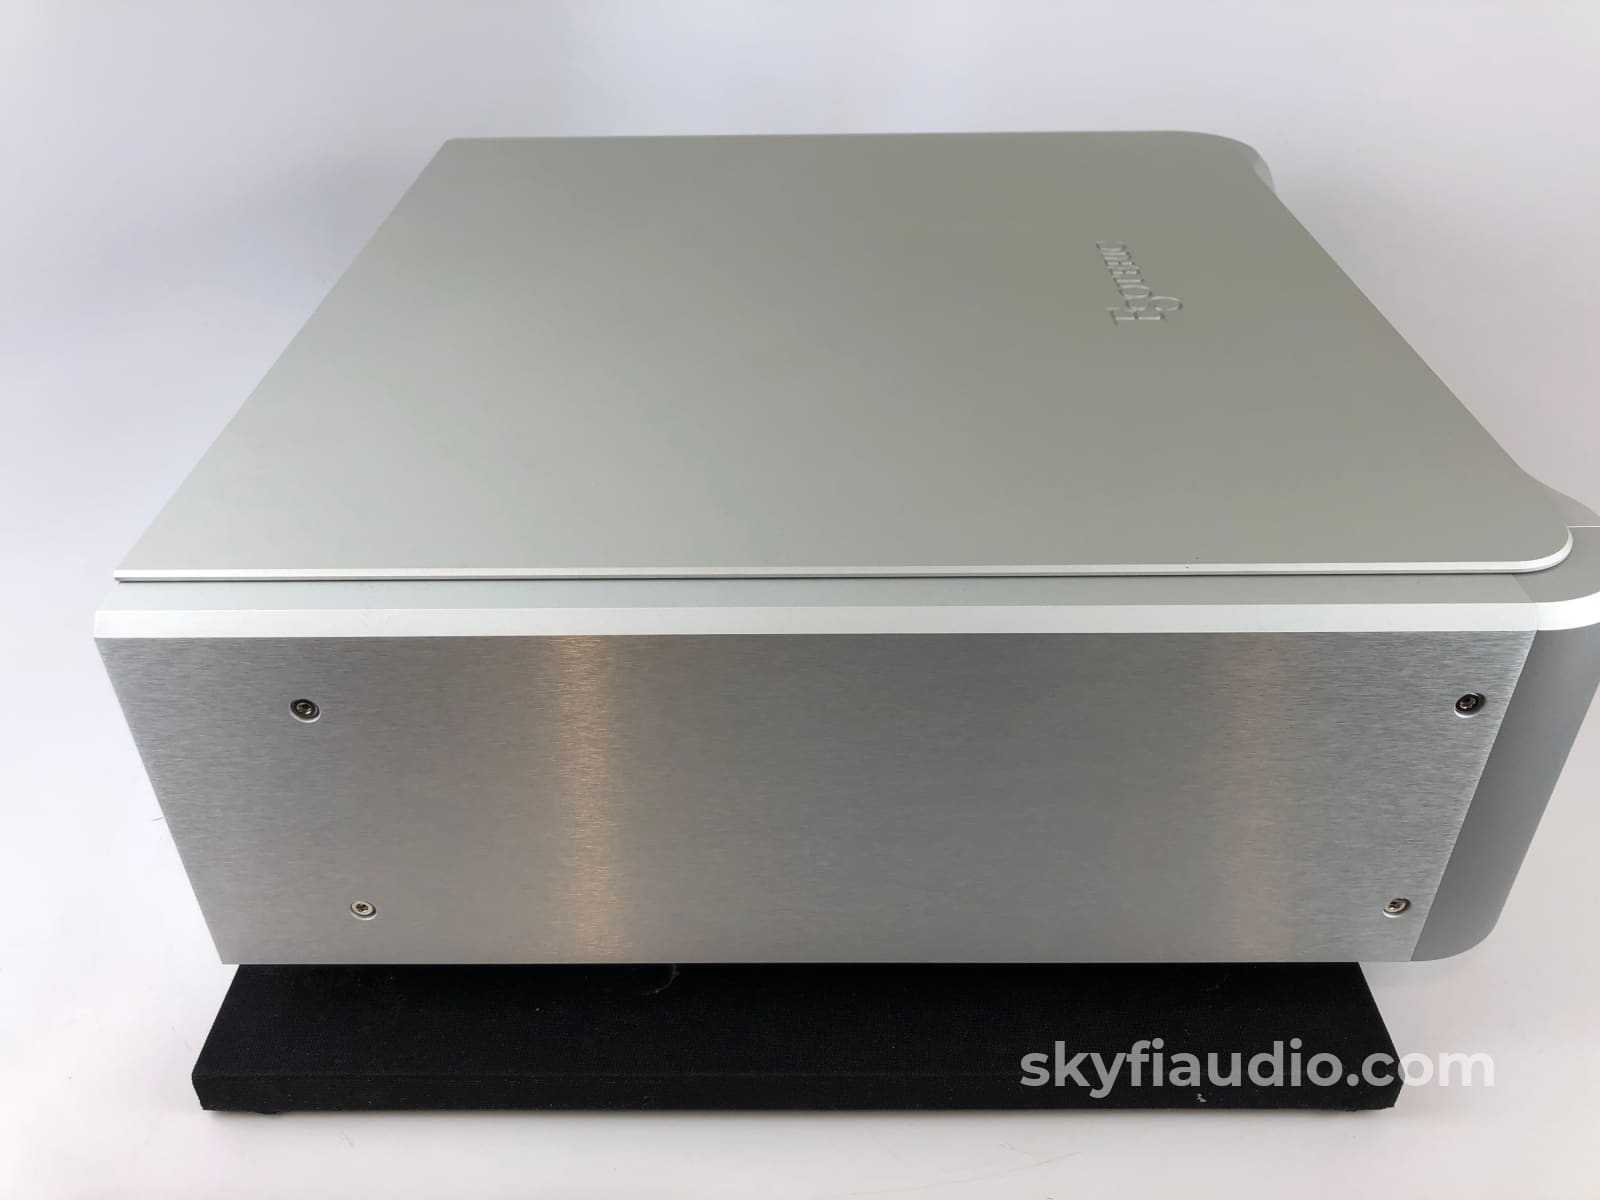 Esoteric K-03 Sacd/Cd Player With Remote And Manual (A) Cd + Digital